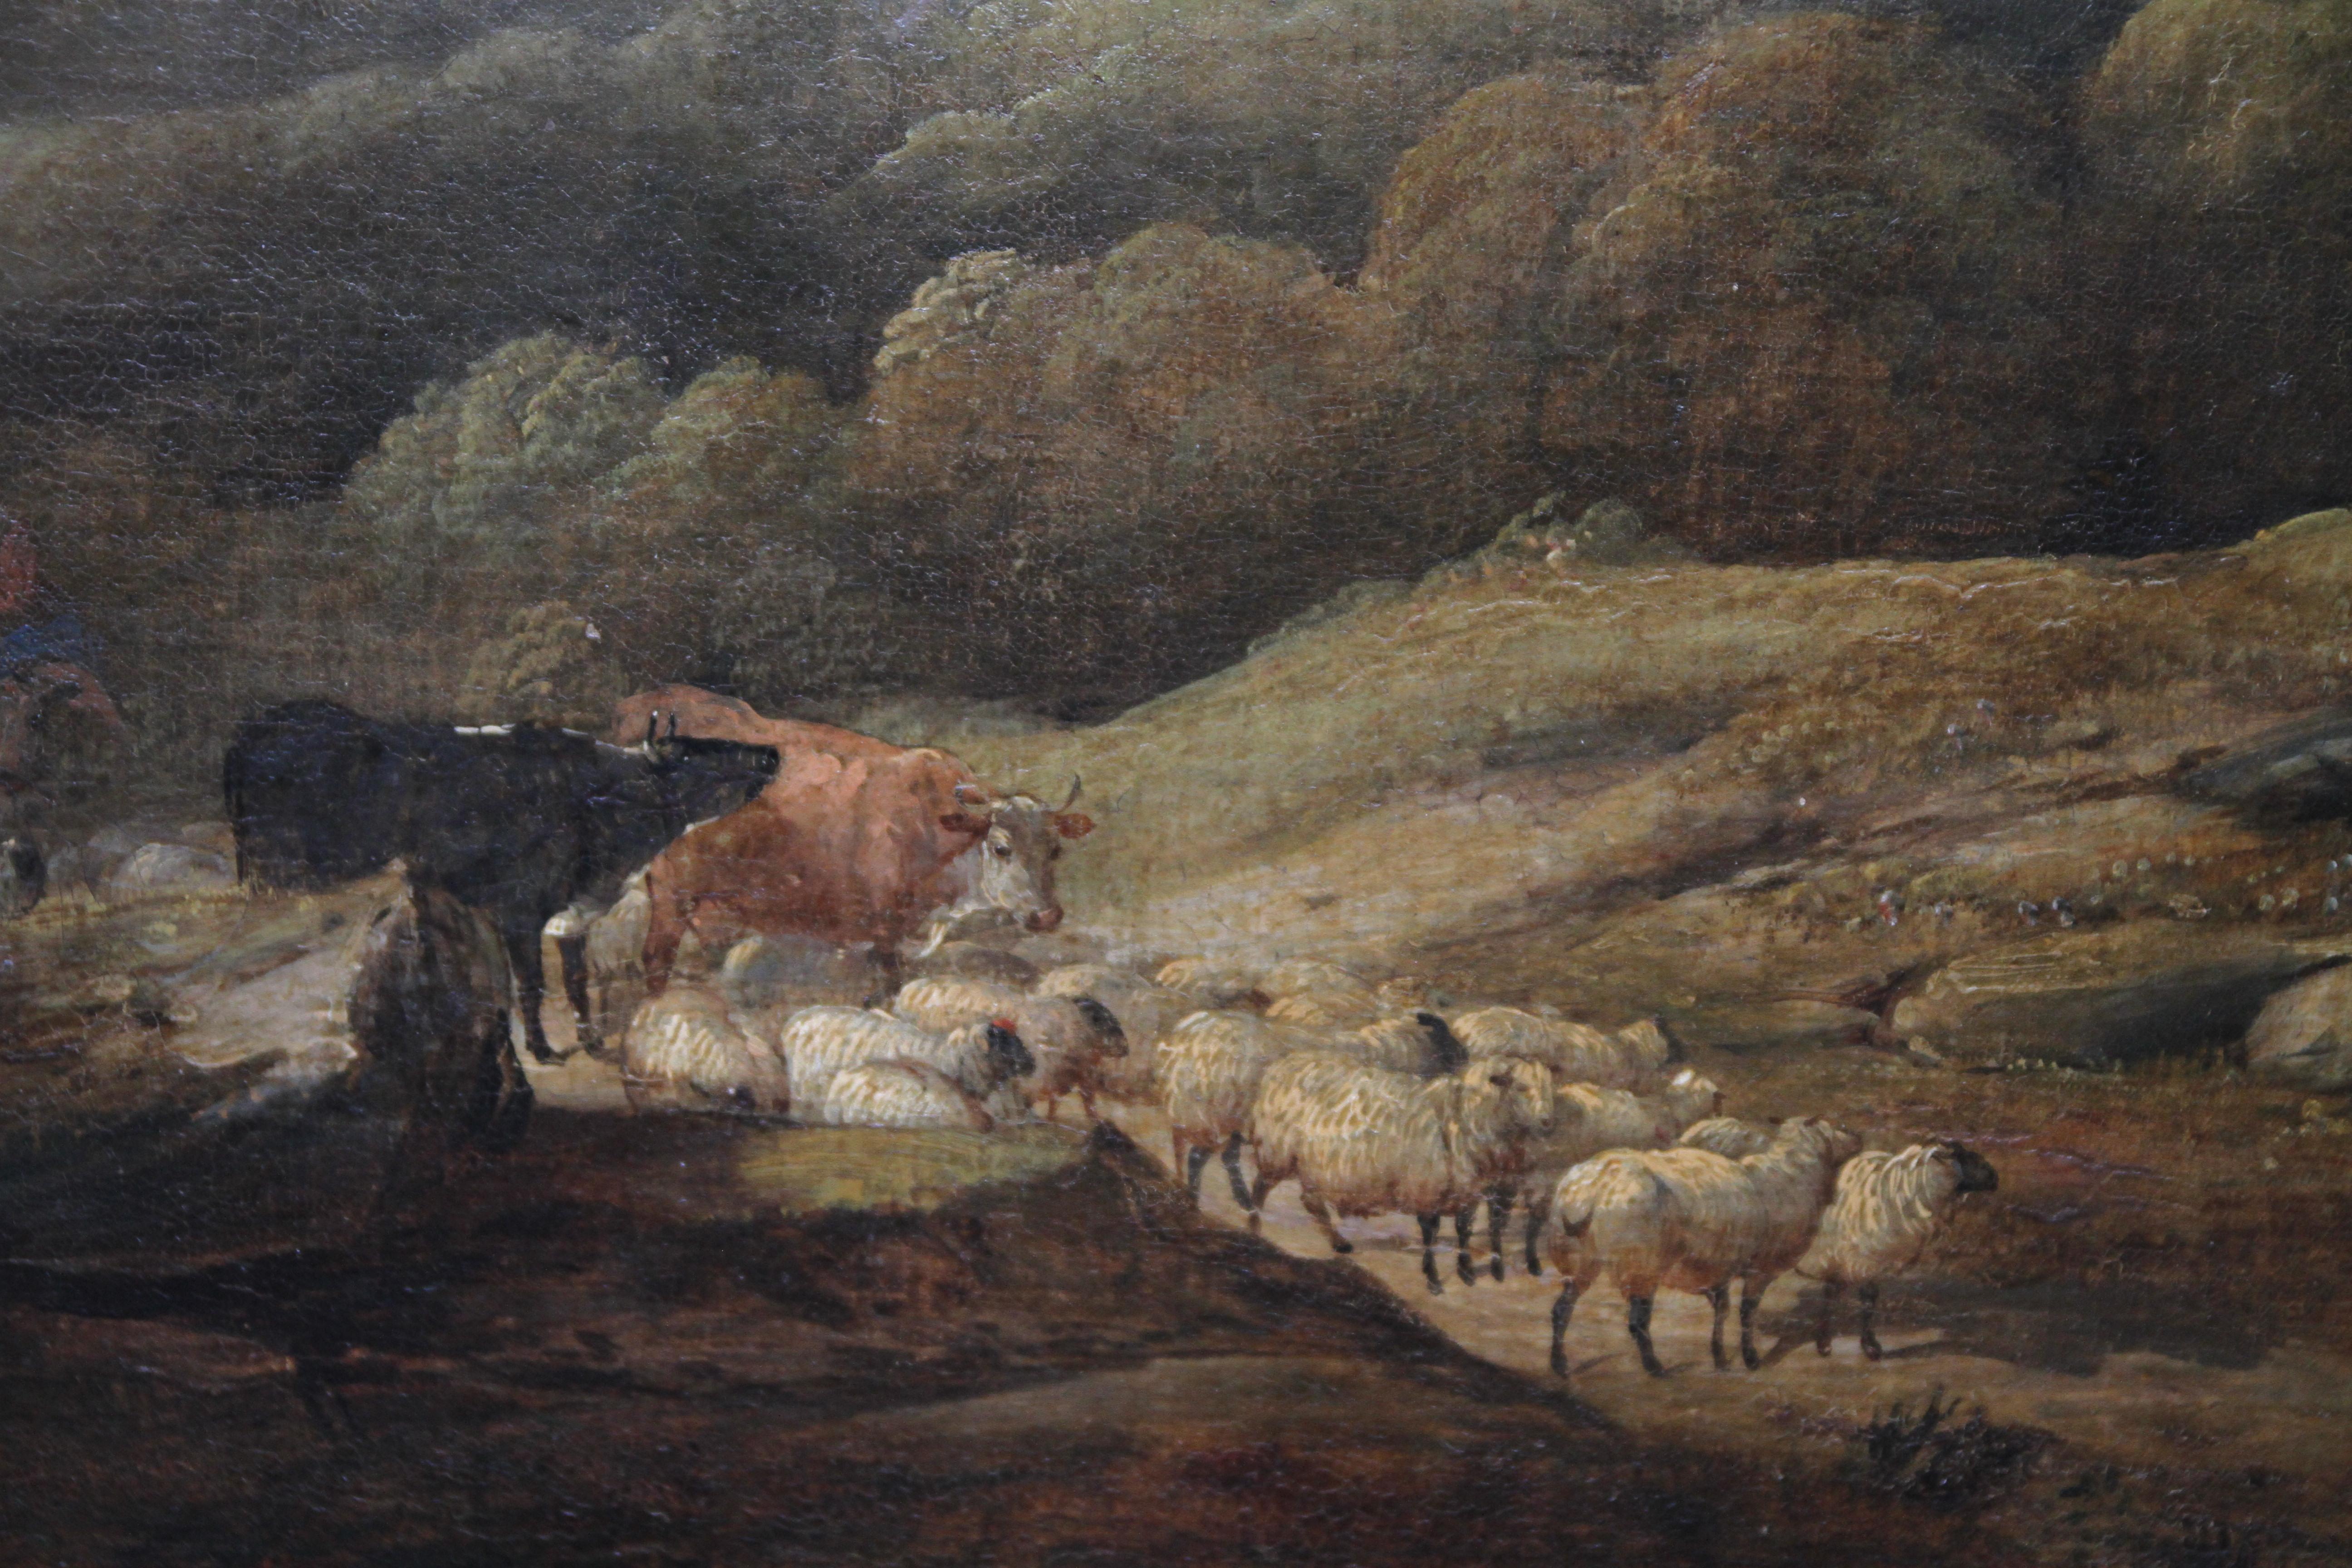 Cattle and Drover in a Landscape - British Victorian art landscape oil painting - Black Animal Painting by Henry Jutsum 